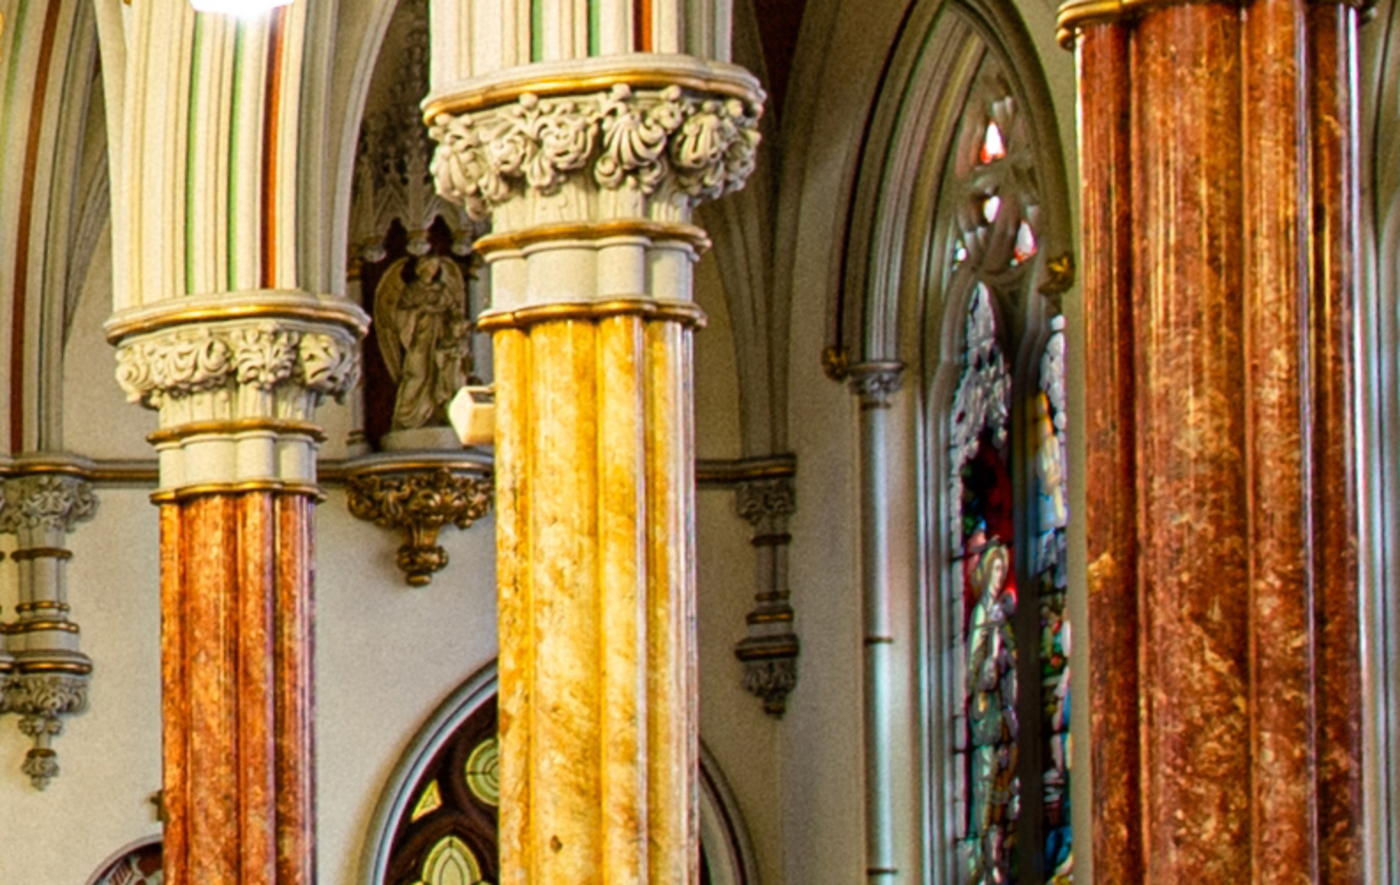 The scagiola columns at St. Francis Xavier are superb examples of this demanding architectural-artistic technique. Their coloring matches the pillars and columns of the altar.